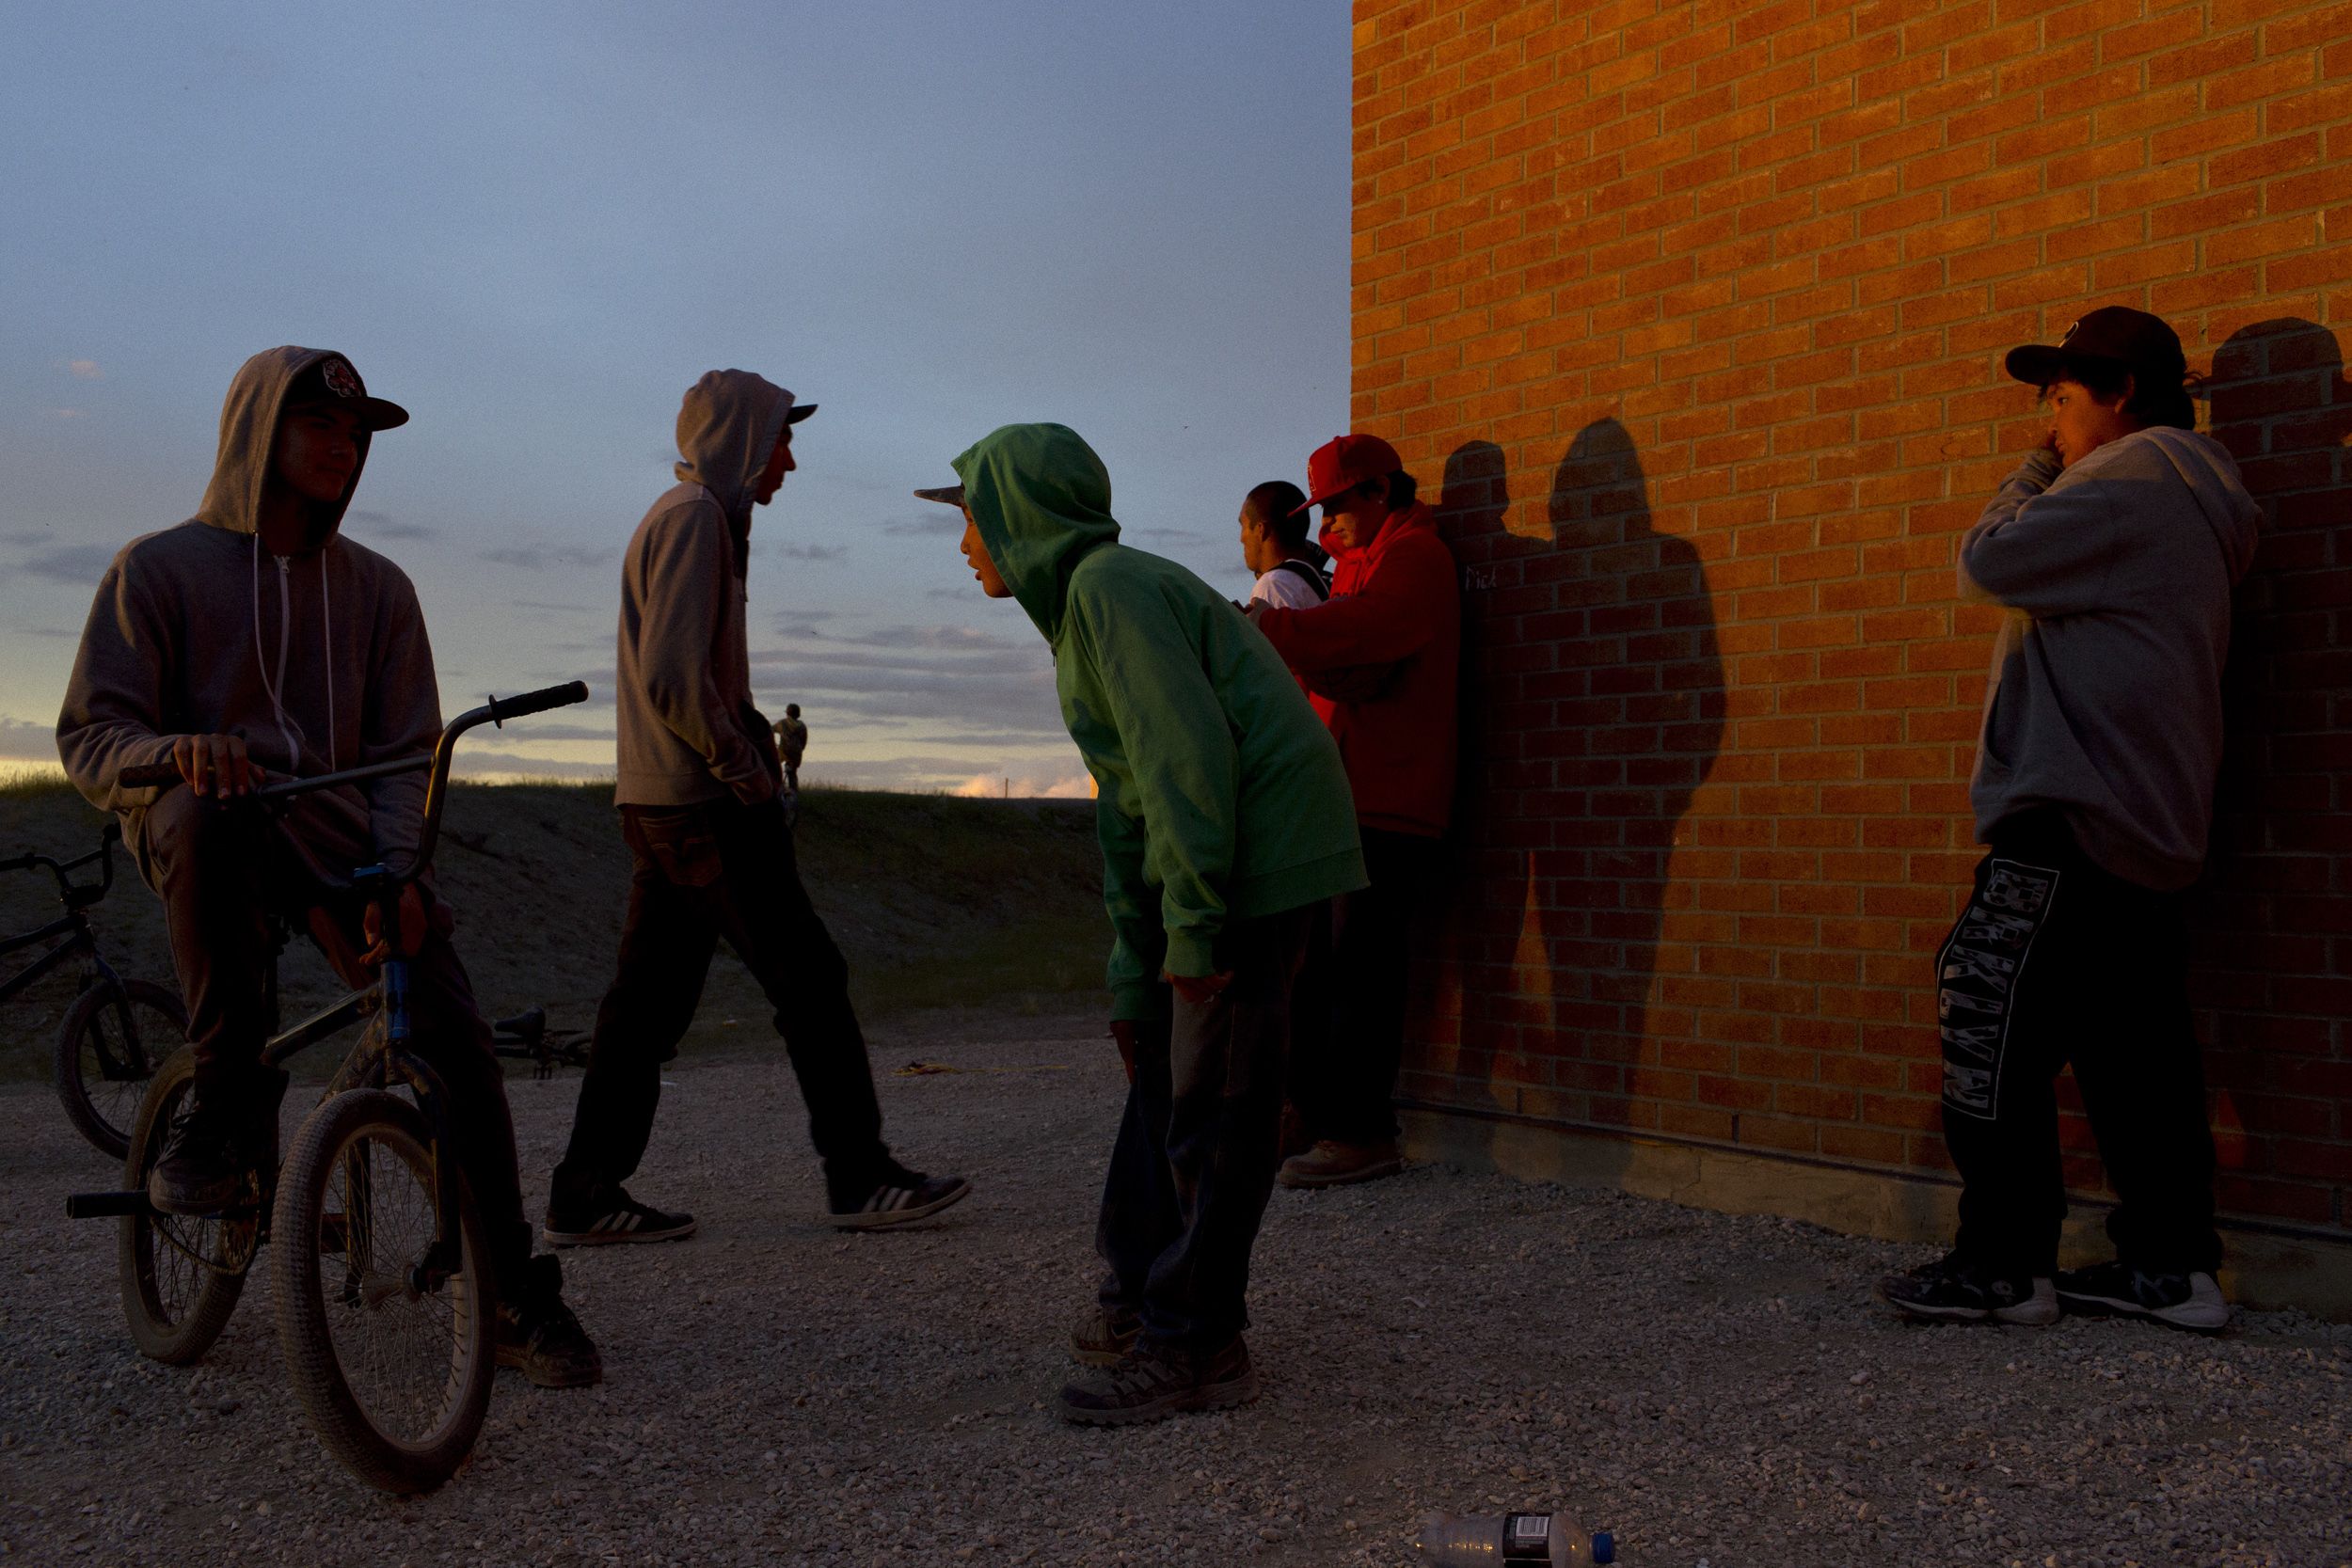 Young people gather at dusk outside the Kattawapiskak Elementary School. The suicide crisis that captured media attention in 2016 included attempts by teenagers. Image by David Maurice Smith/Oculi. Canada, 2016.